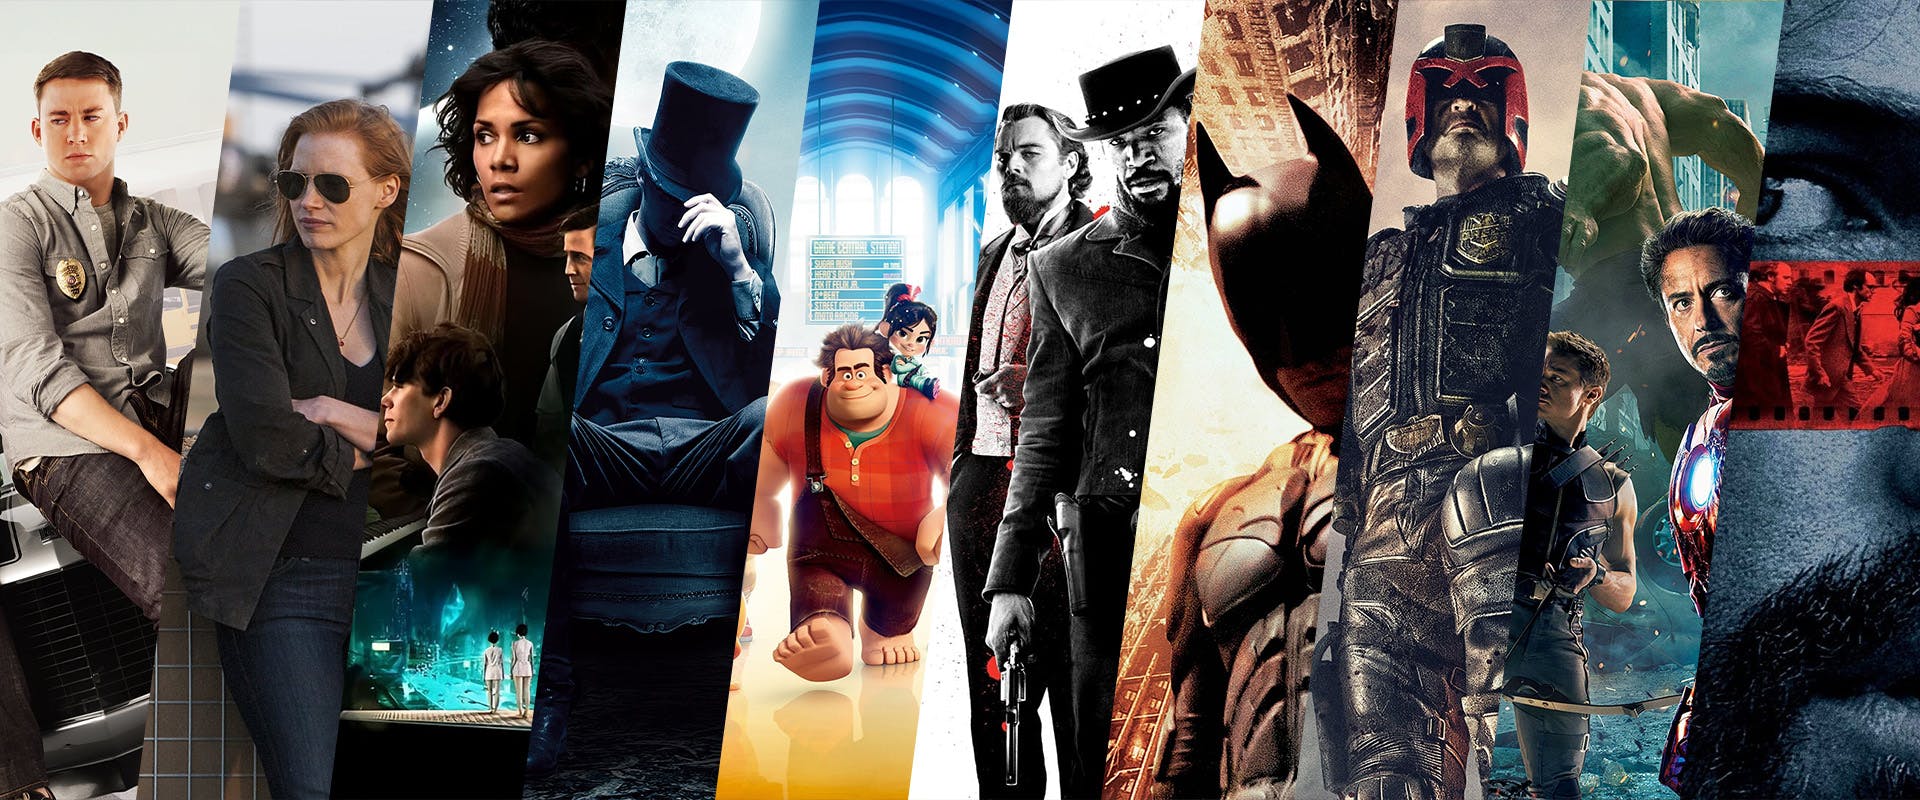 Top 10 Movies of 2012